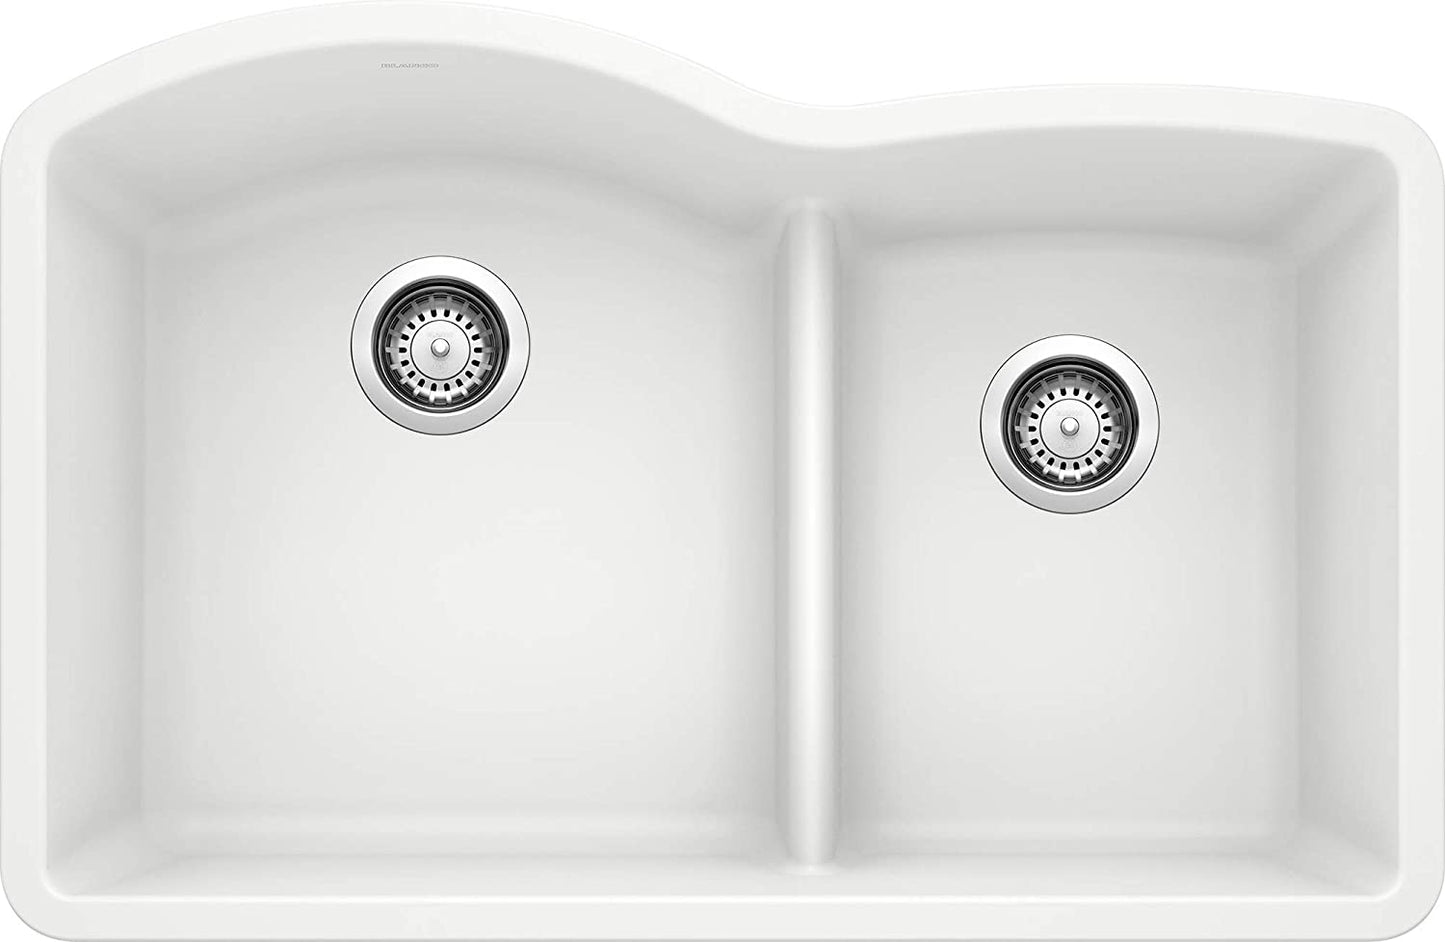 Diamond 1-3/4 Double Bowl Undermount Kitchen Sink with Low Divide, 32" X 21" - White